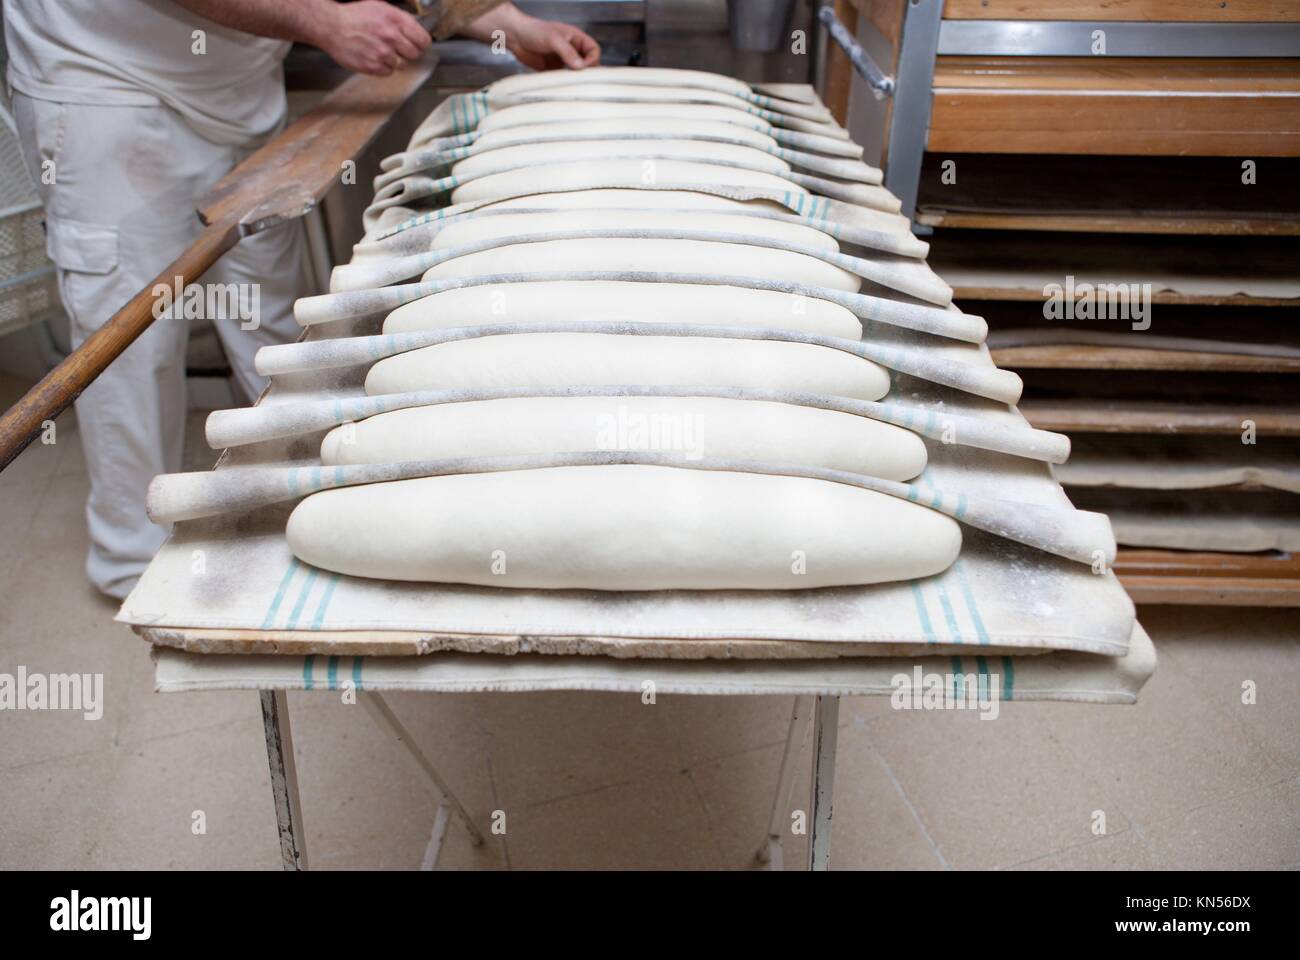 Baker putting kaiser roll dough into the oven. Manufacturing process of spanish bread. Stock Photo